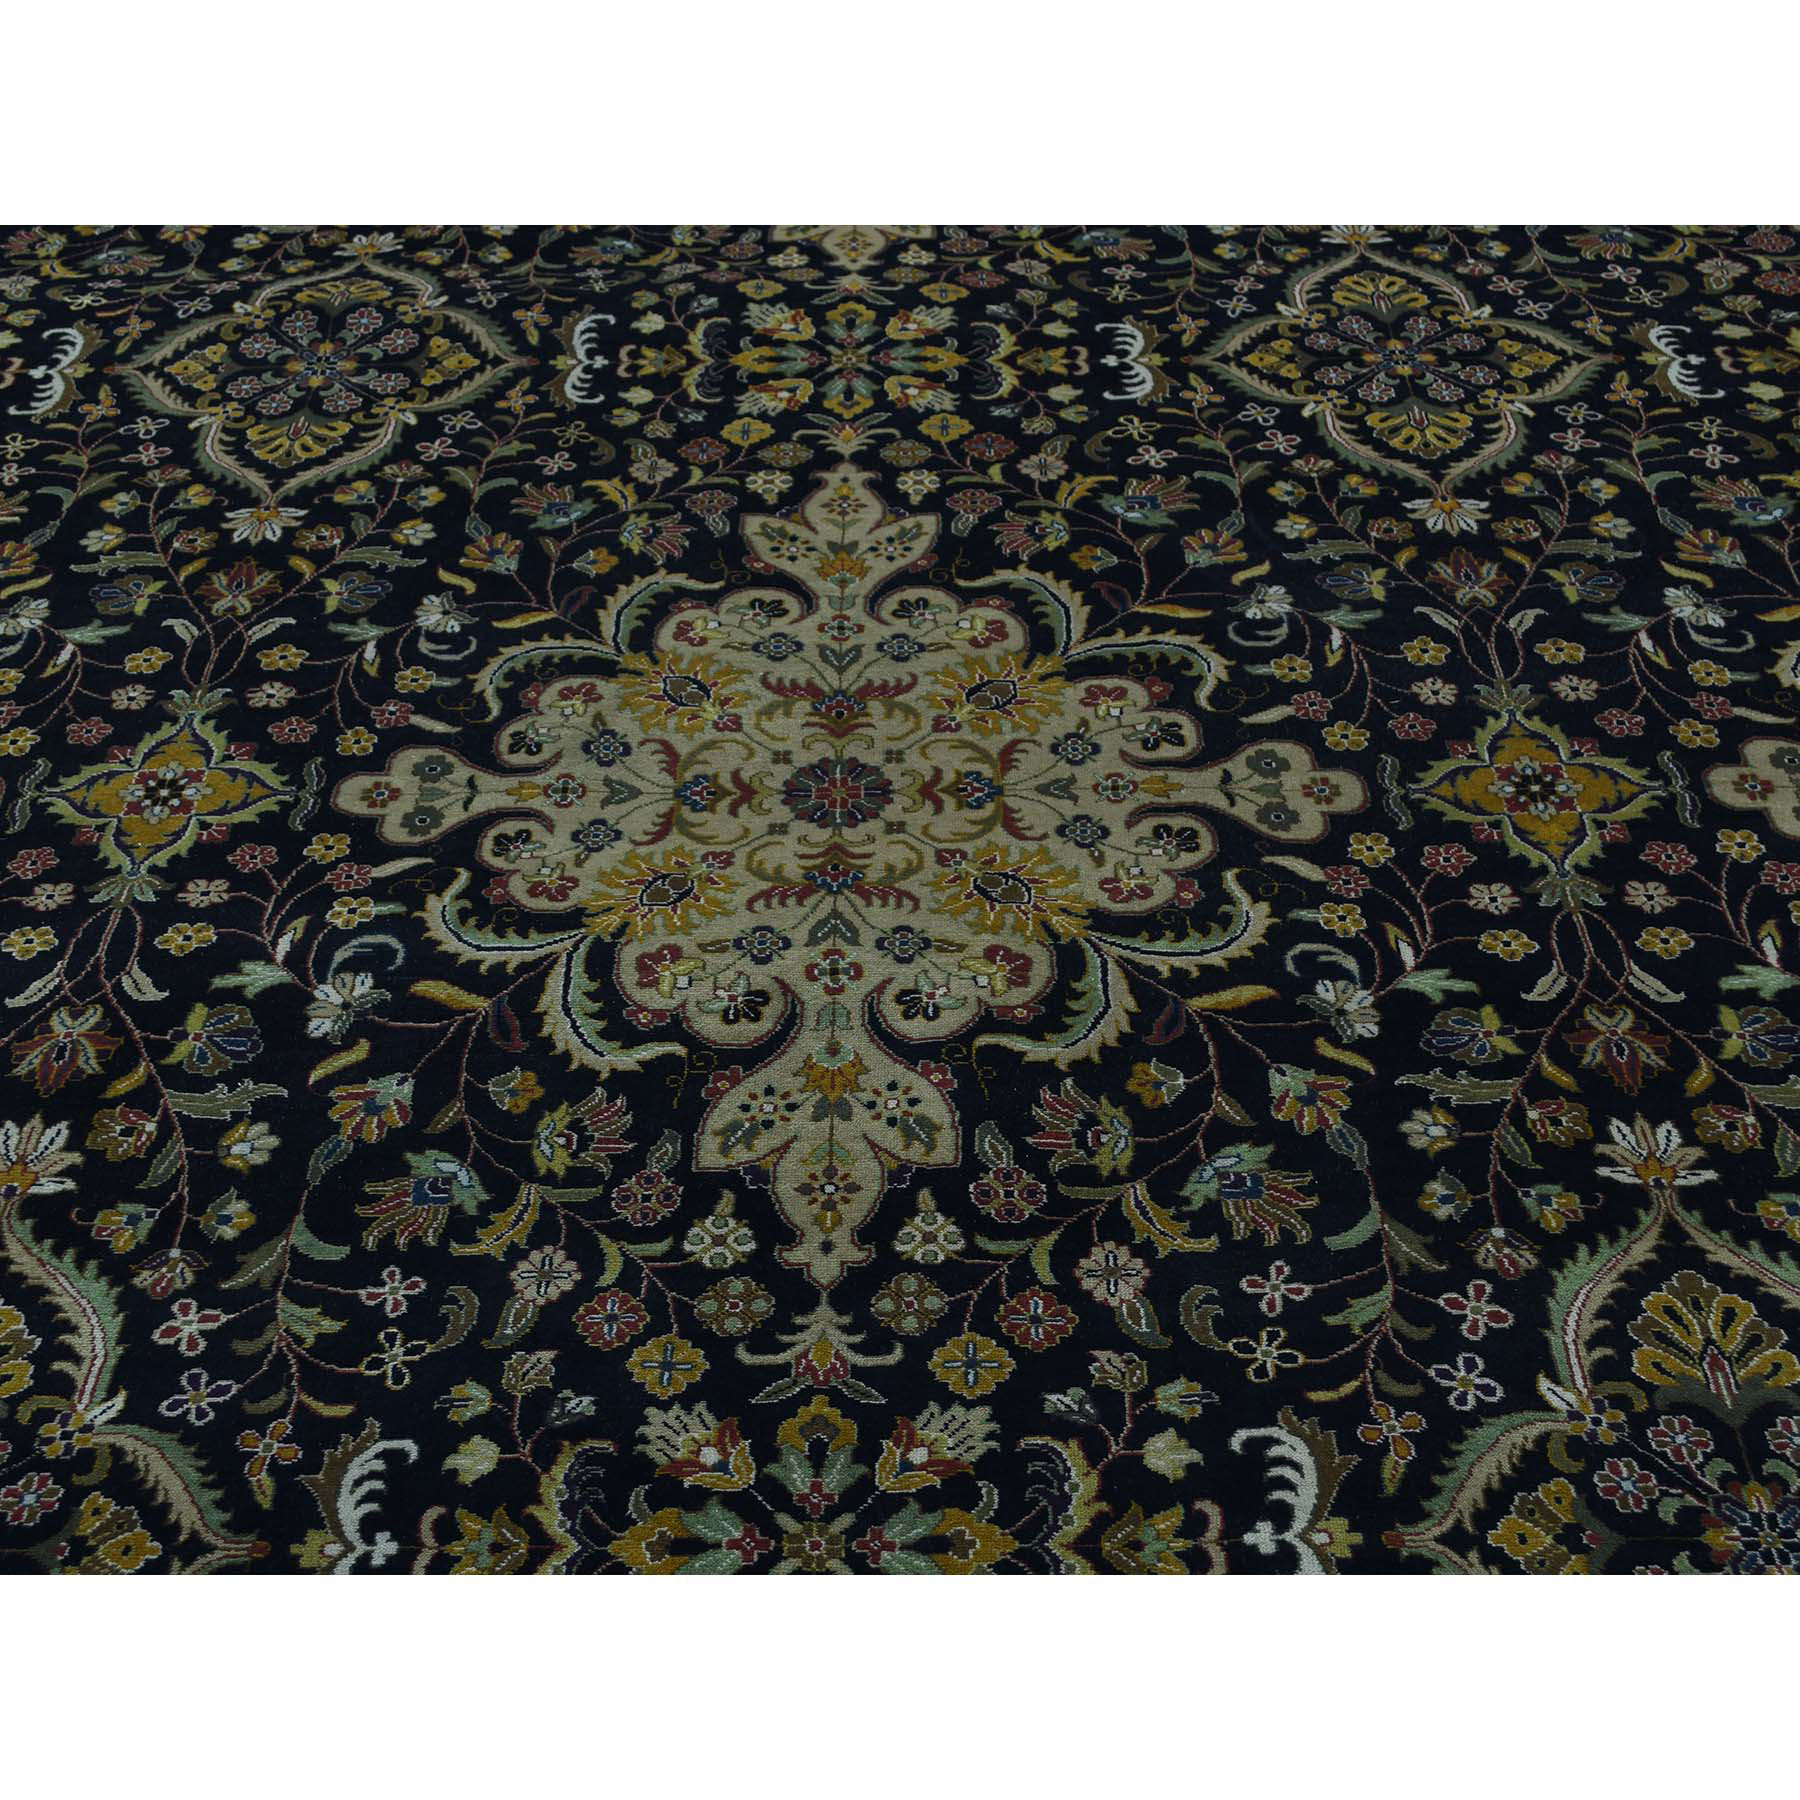 10-x15-10  Hand-Knotted Kashan Revival 300 Kpsi New Zealand Wool Gallery 